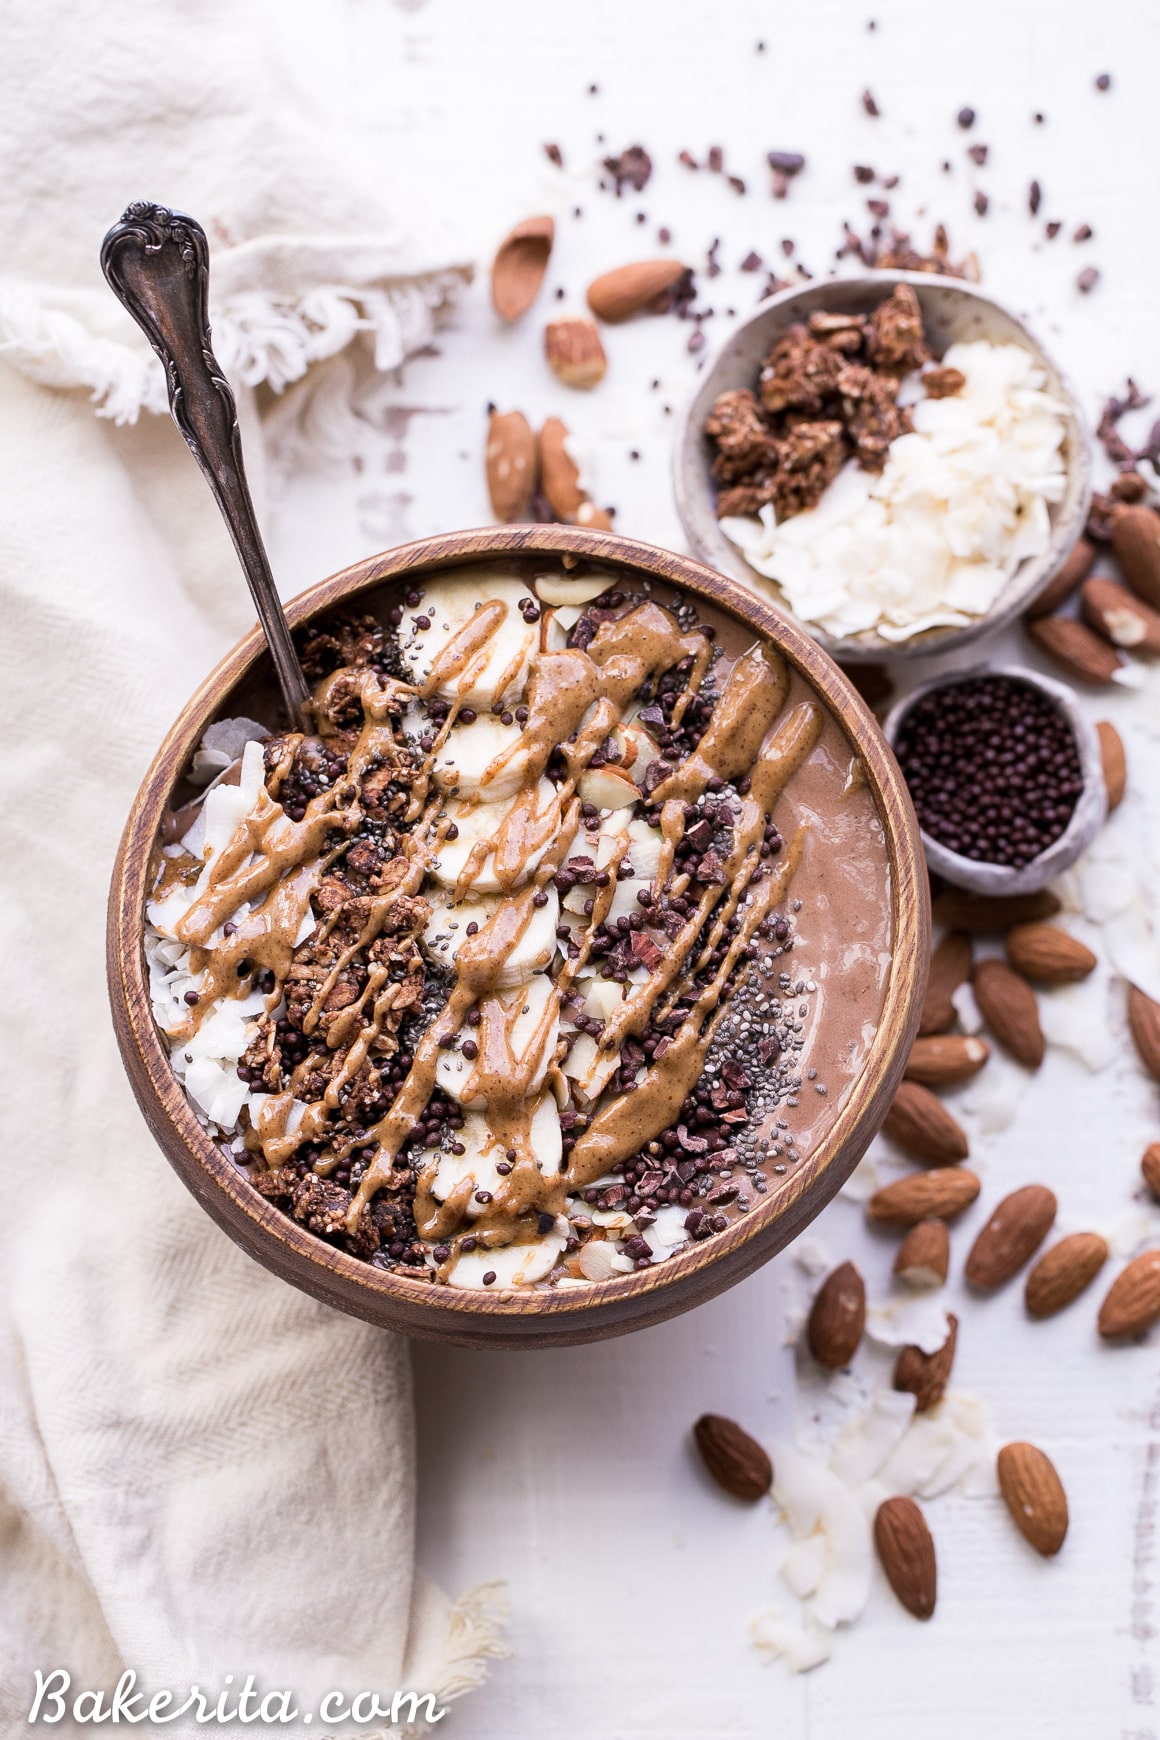 This Almond Chocolate Coconut Smoothie Bowl is refreshing and chocolatey - it's an absolutely delicious way to start the day! This easy recipe is gluten-free, vegan, and comes together in 5 minutes.